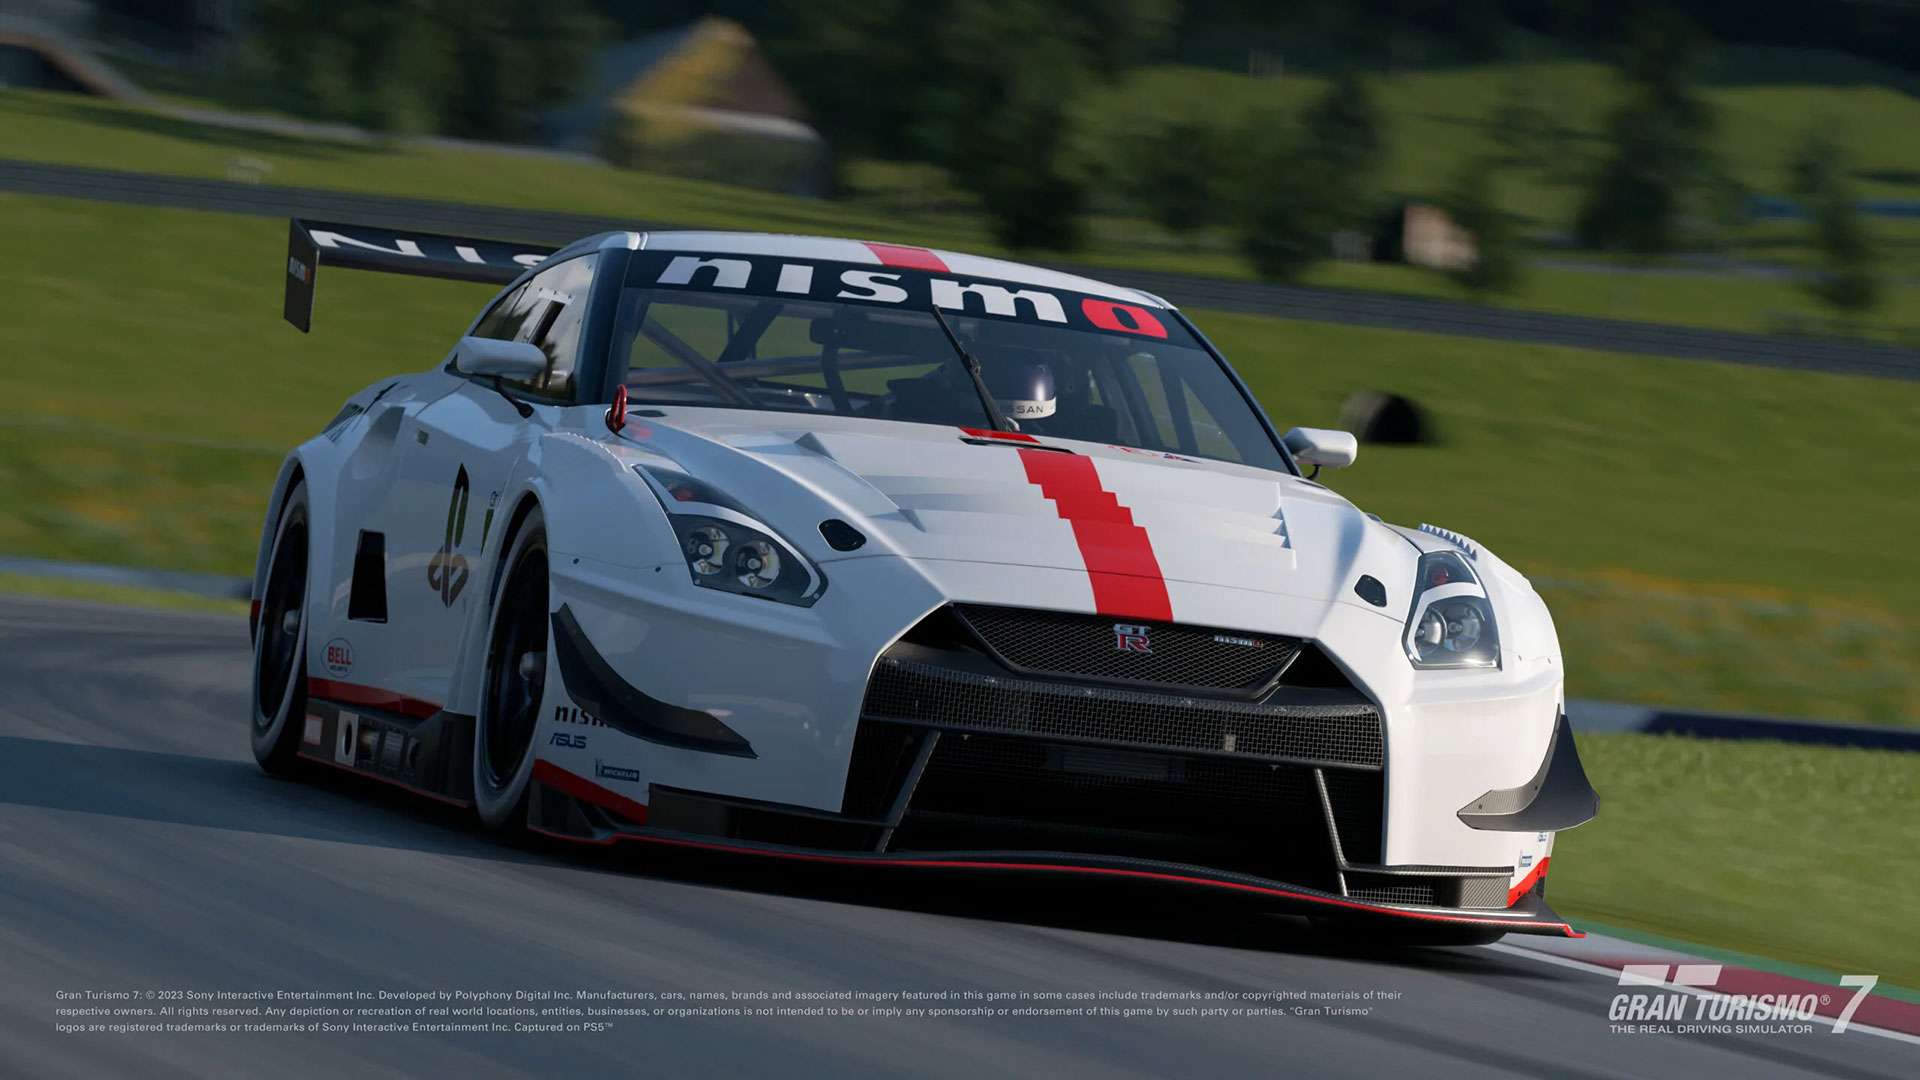 Gran Turismo 7 update 1.36 adds four new cars, a Gran Turismo movie experience, and more